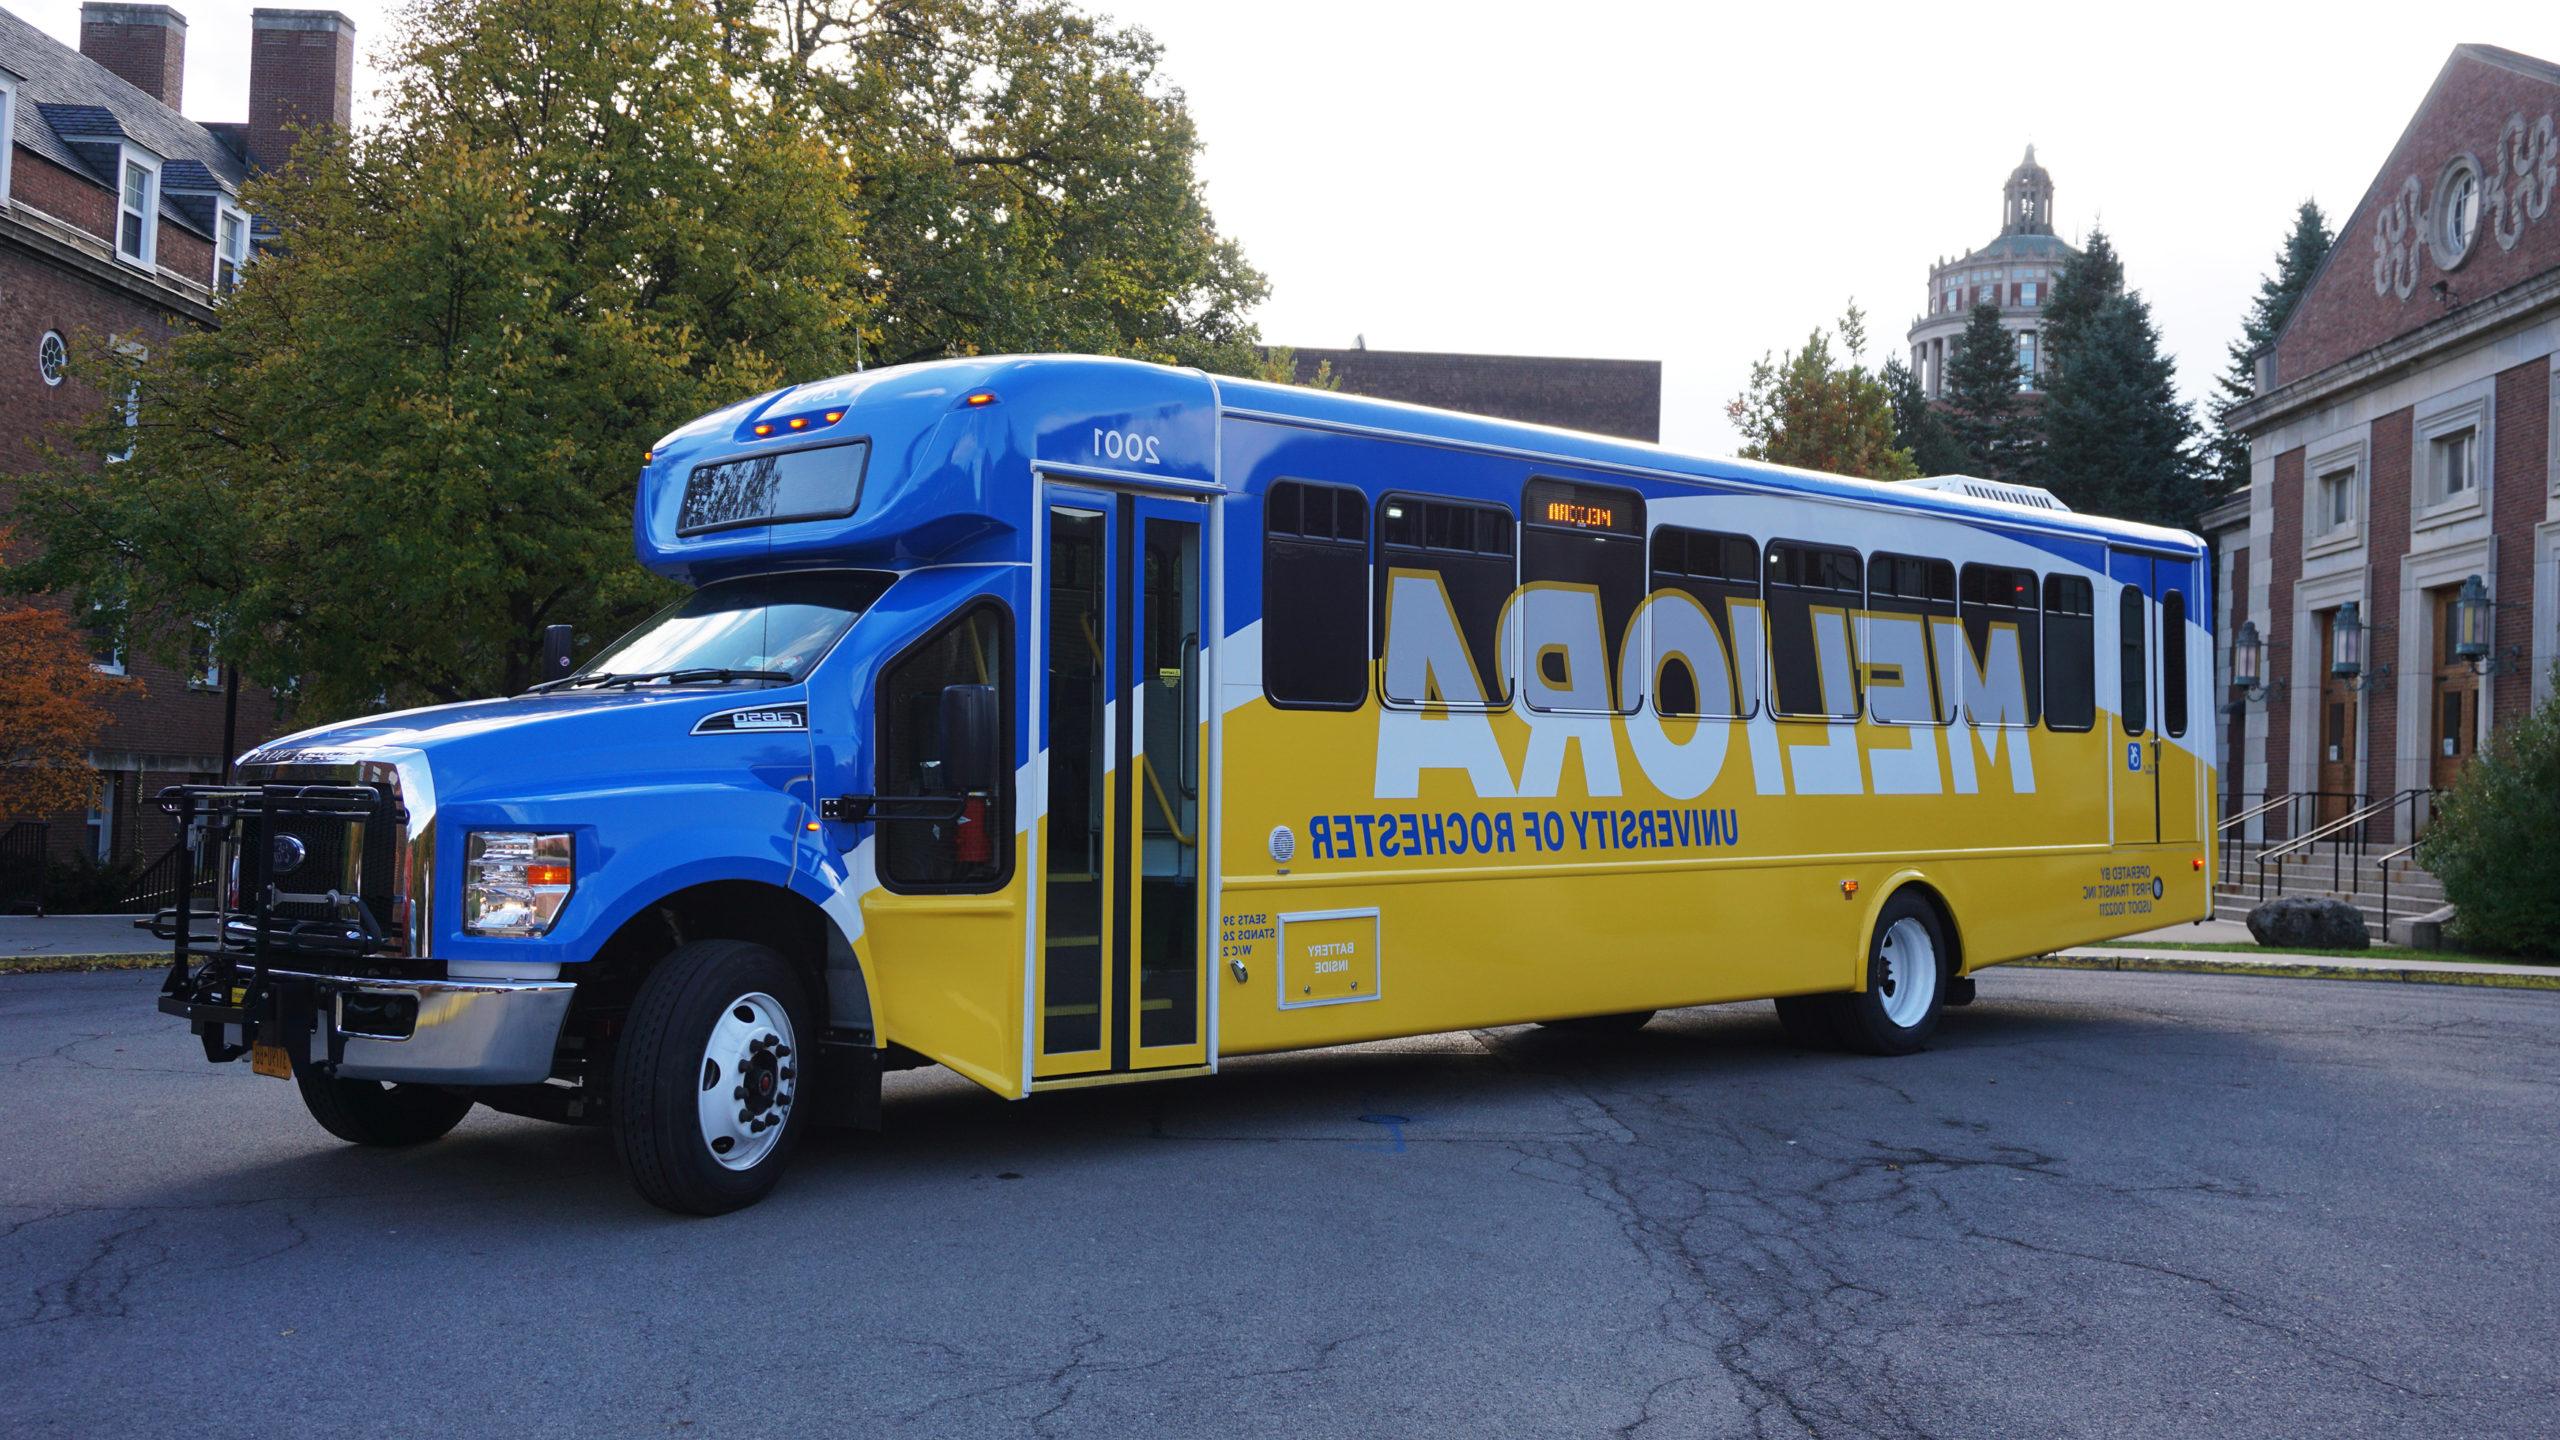 University of Rochester shuttle bus with new blue and yellow wrap